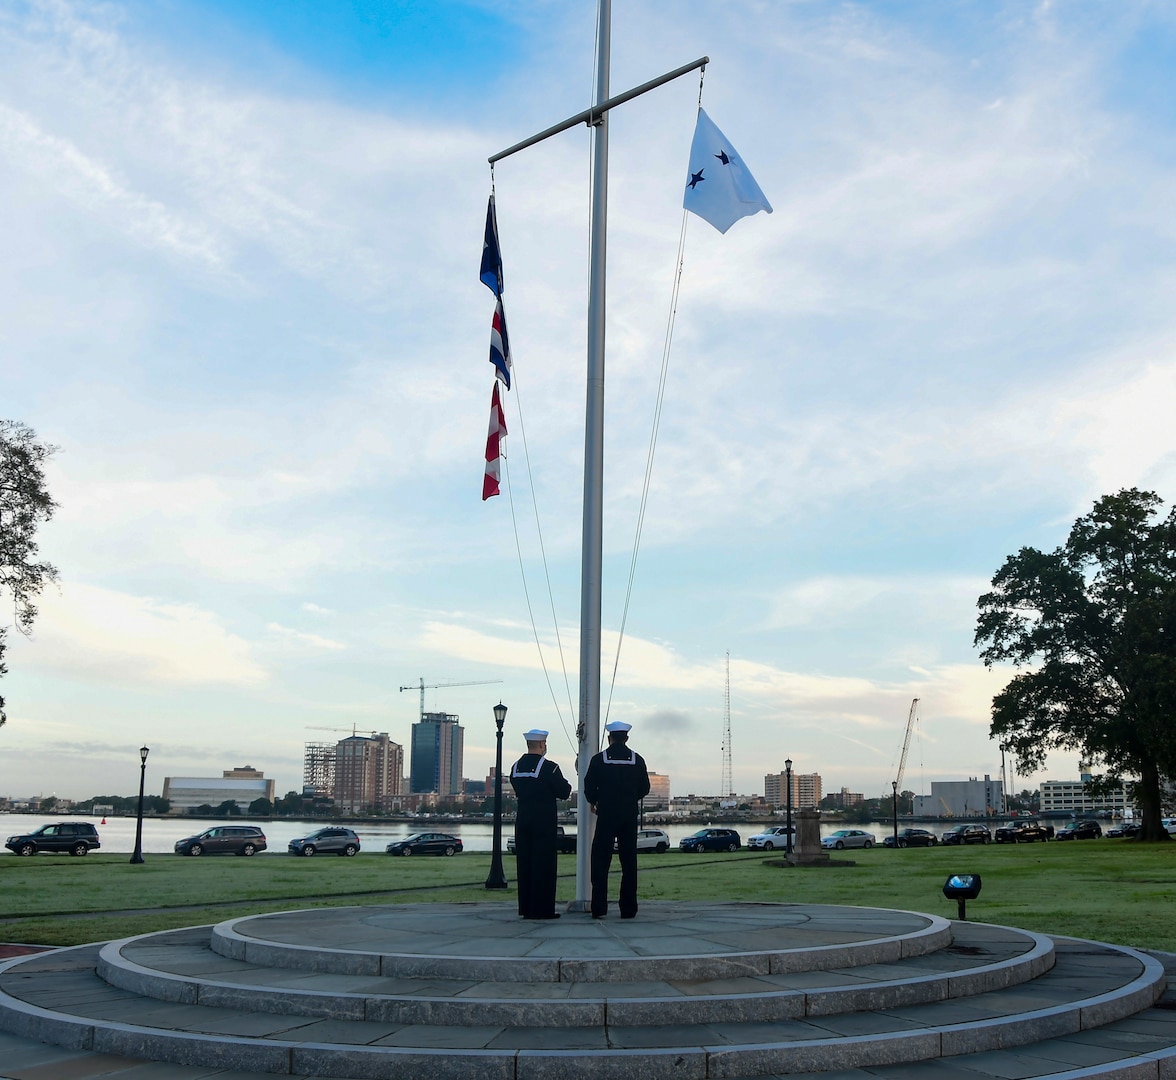 PORTSMOUTH, Va. (Oct. 21, 2020) – Naval Medical Center Portsmouth (NMCP) colors detail raises the two-star Rear Admiral’s pennant upon the arrival of the Surgeon General of the Navy Rear Adm. Bruce Gillingham on Oct. 21.